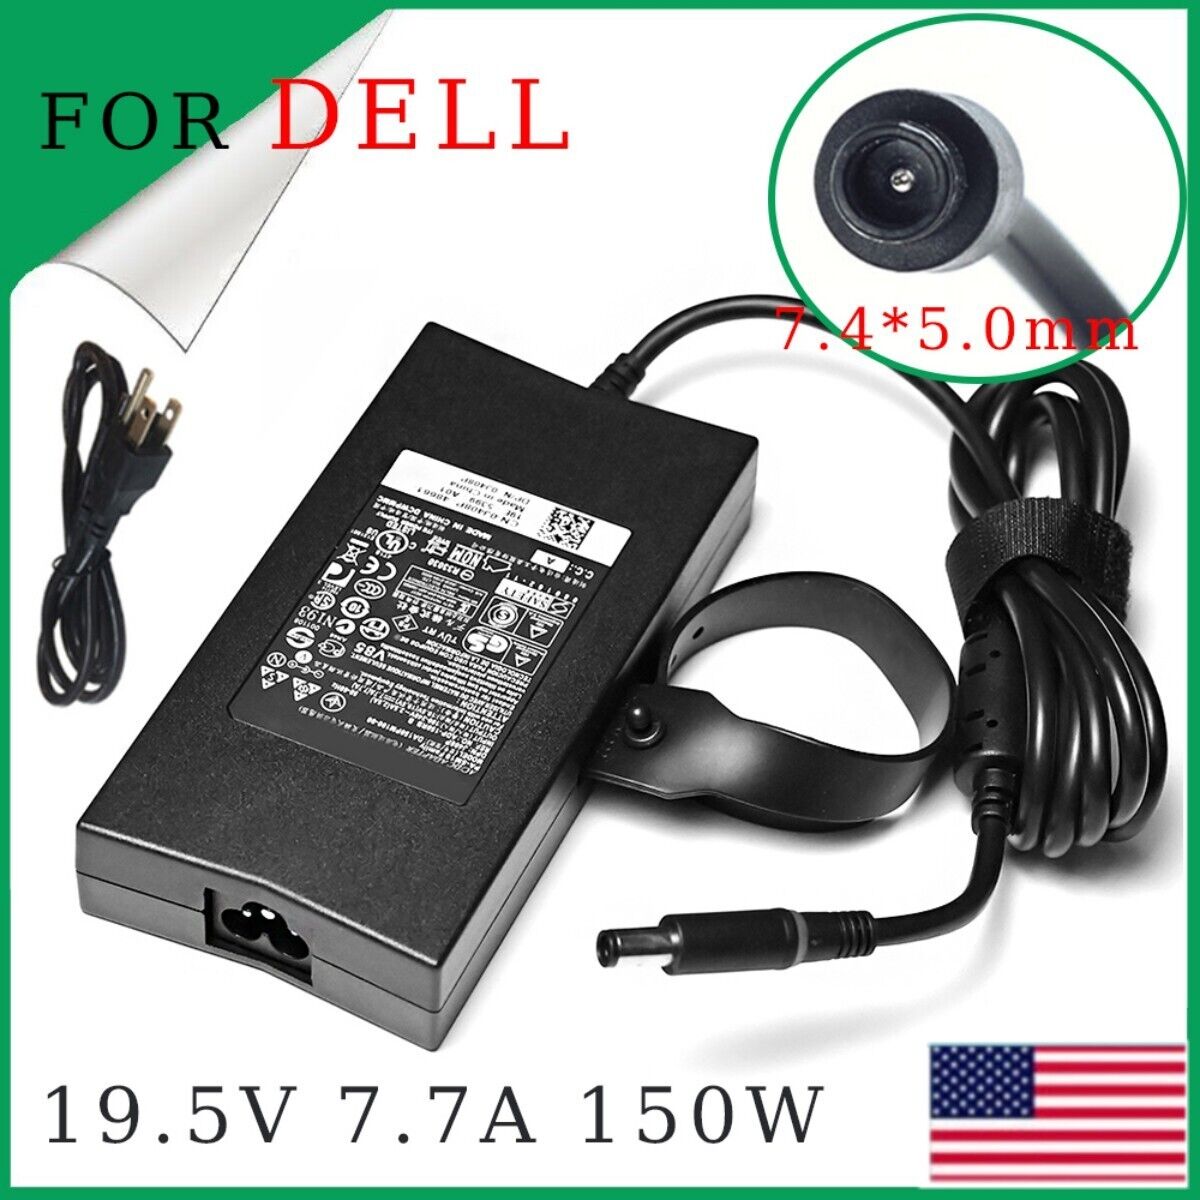 FOR DELL ALIENWARE 19.5V 7.7A 150W AC Adapter Laptop Charger M11X R1 R2 R3 M14X